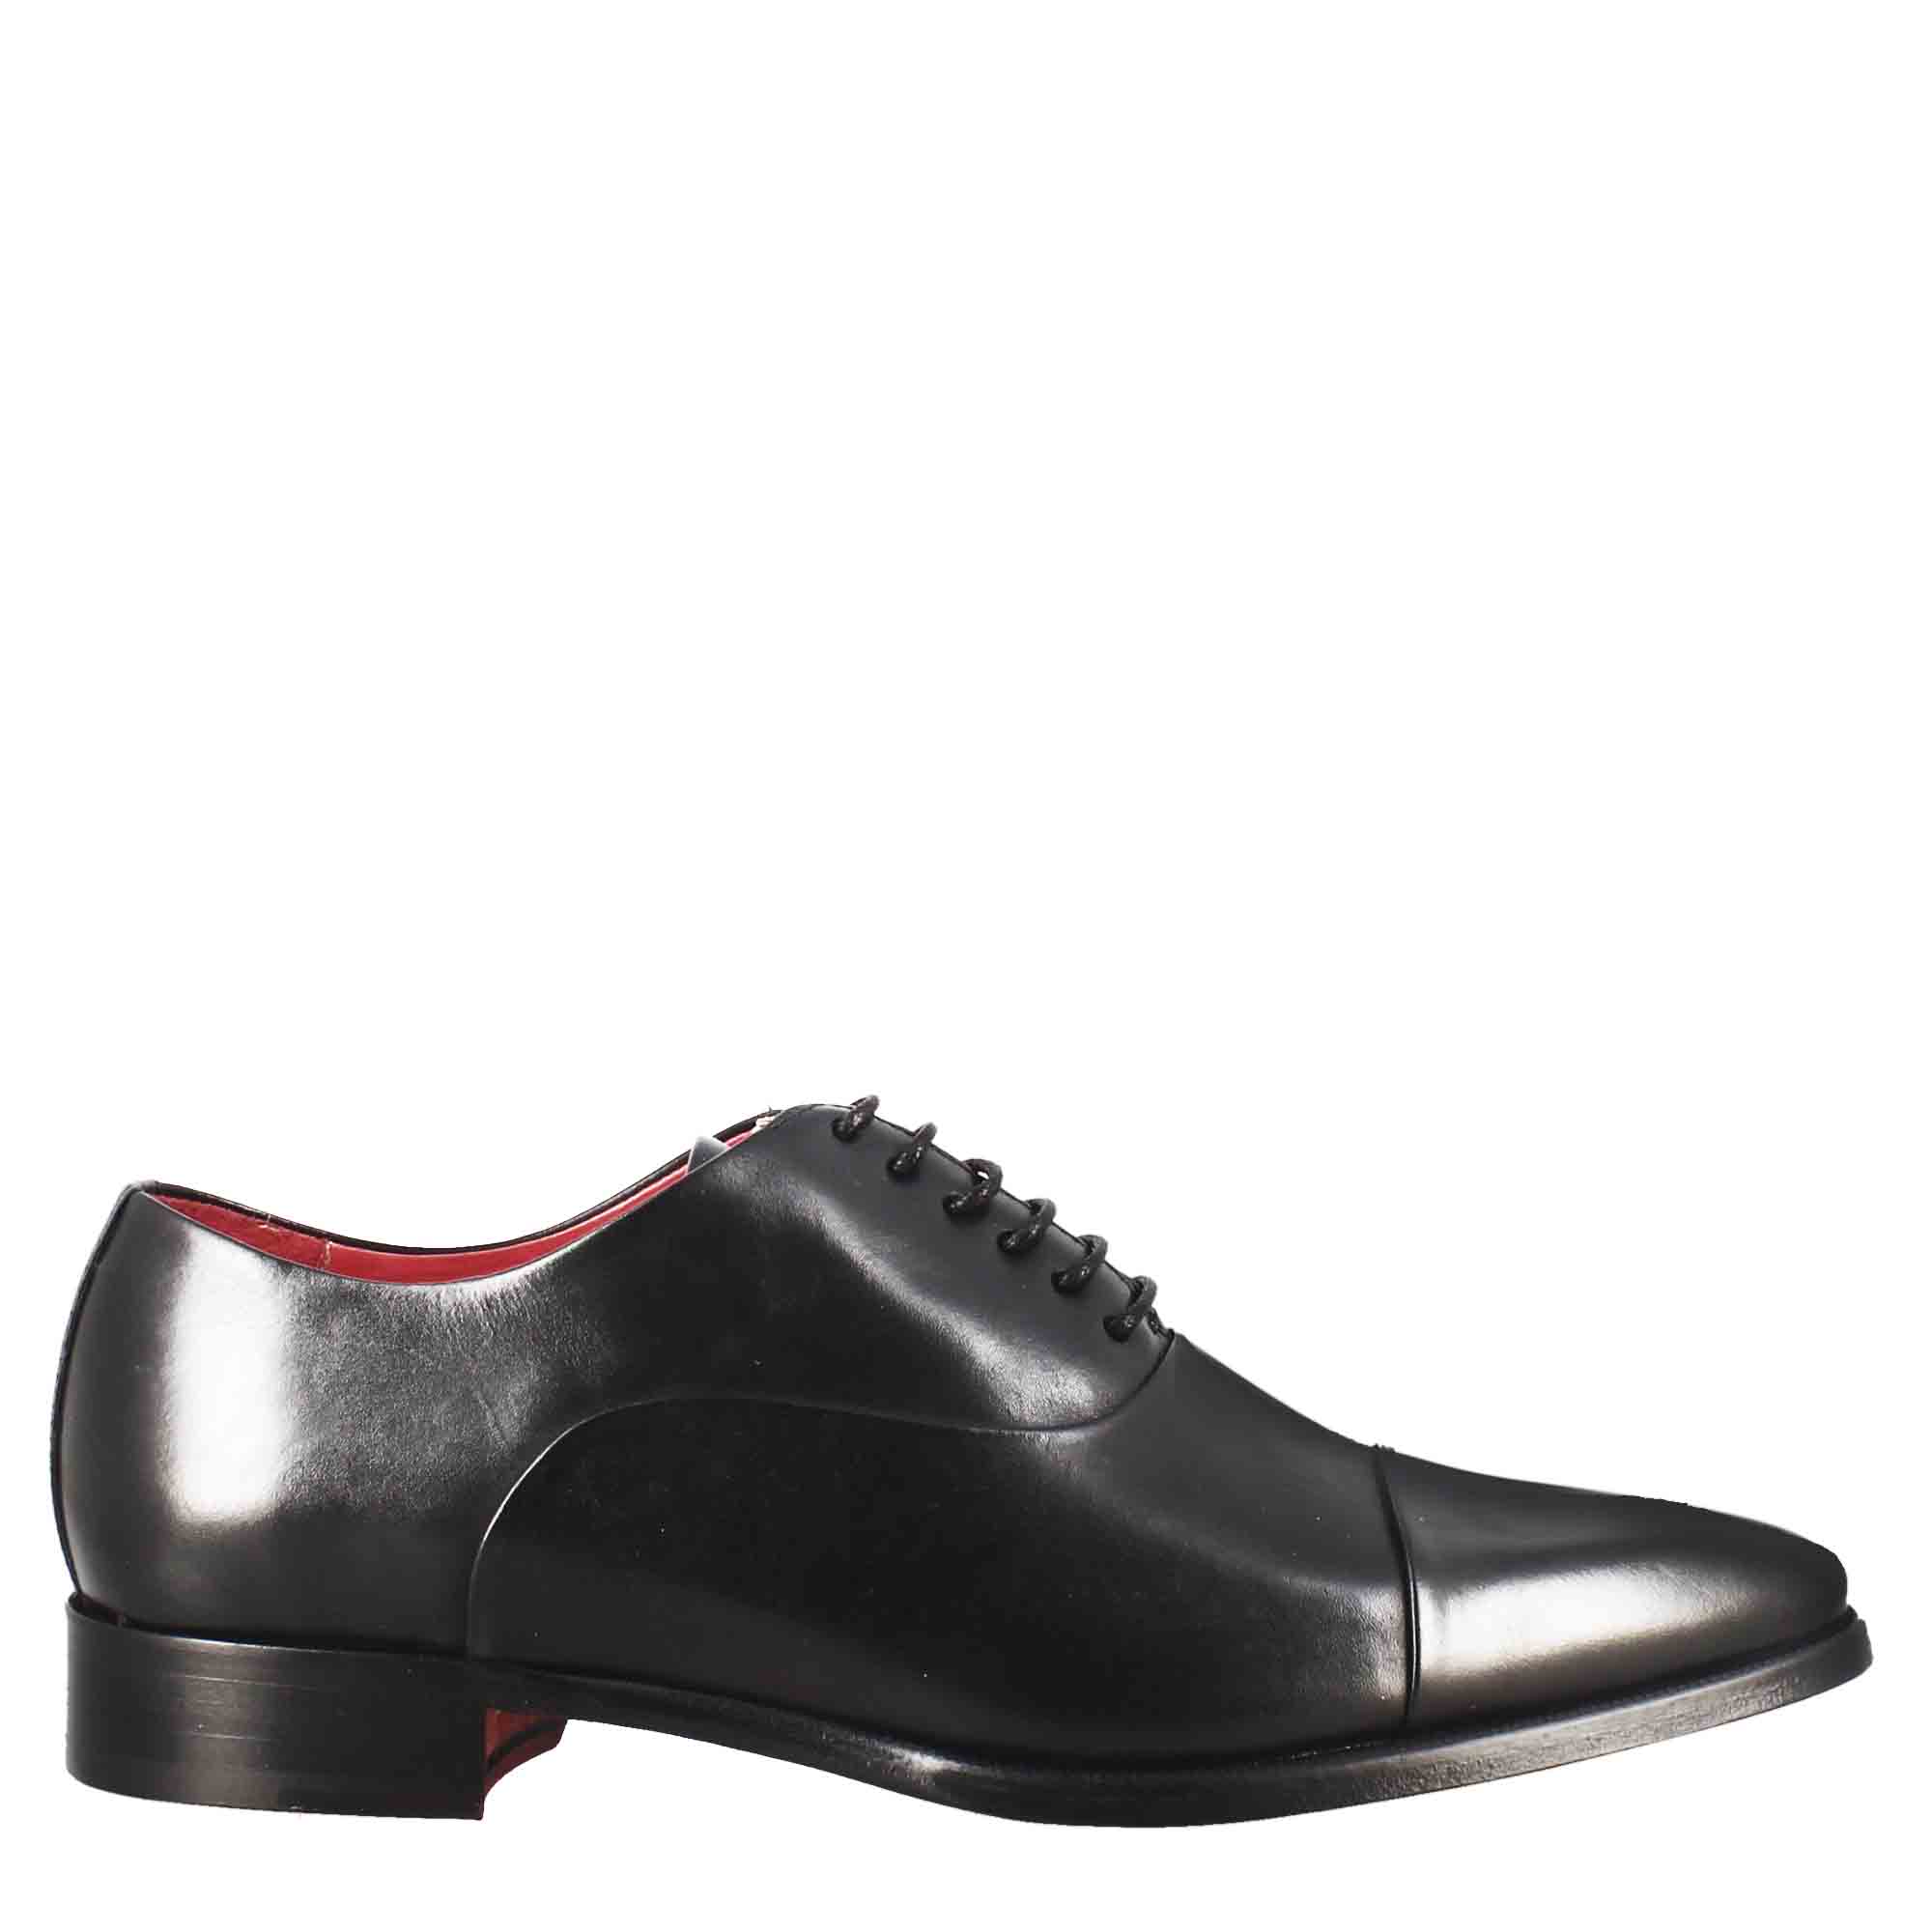 French toe shoes in black leather